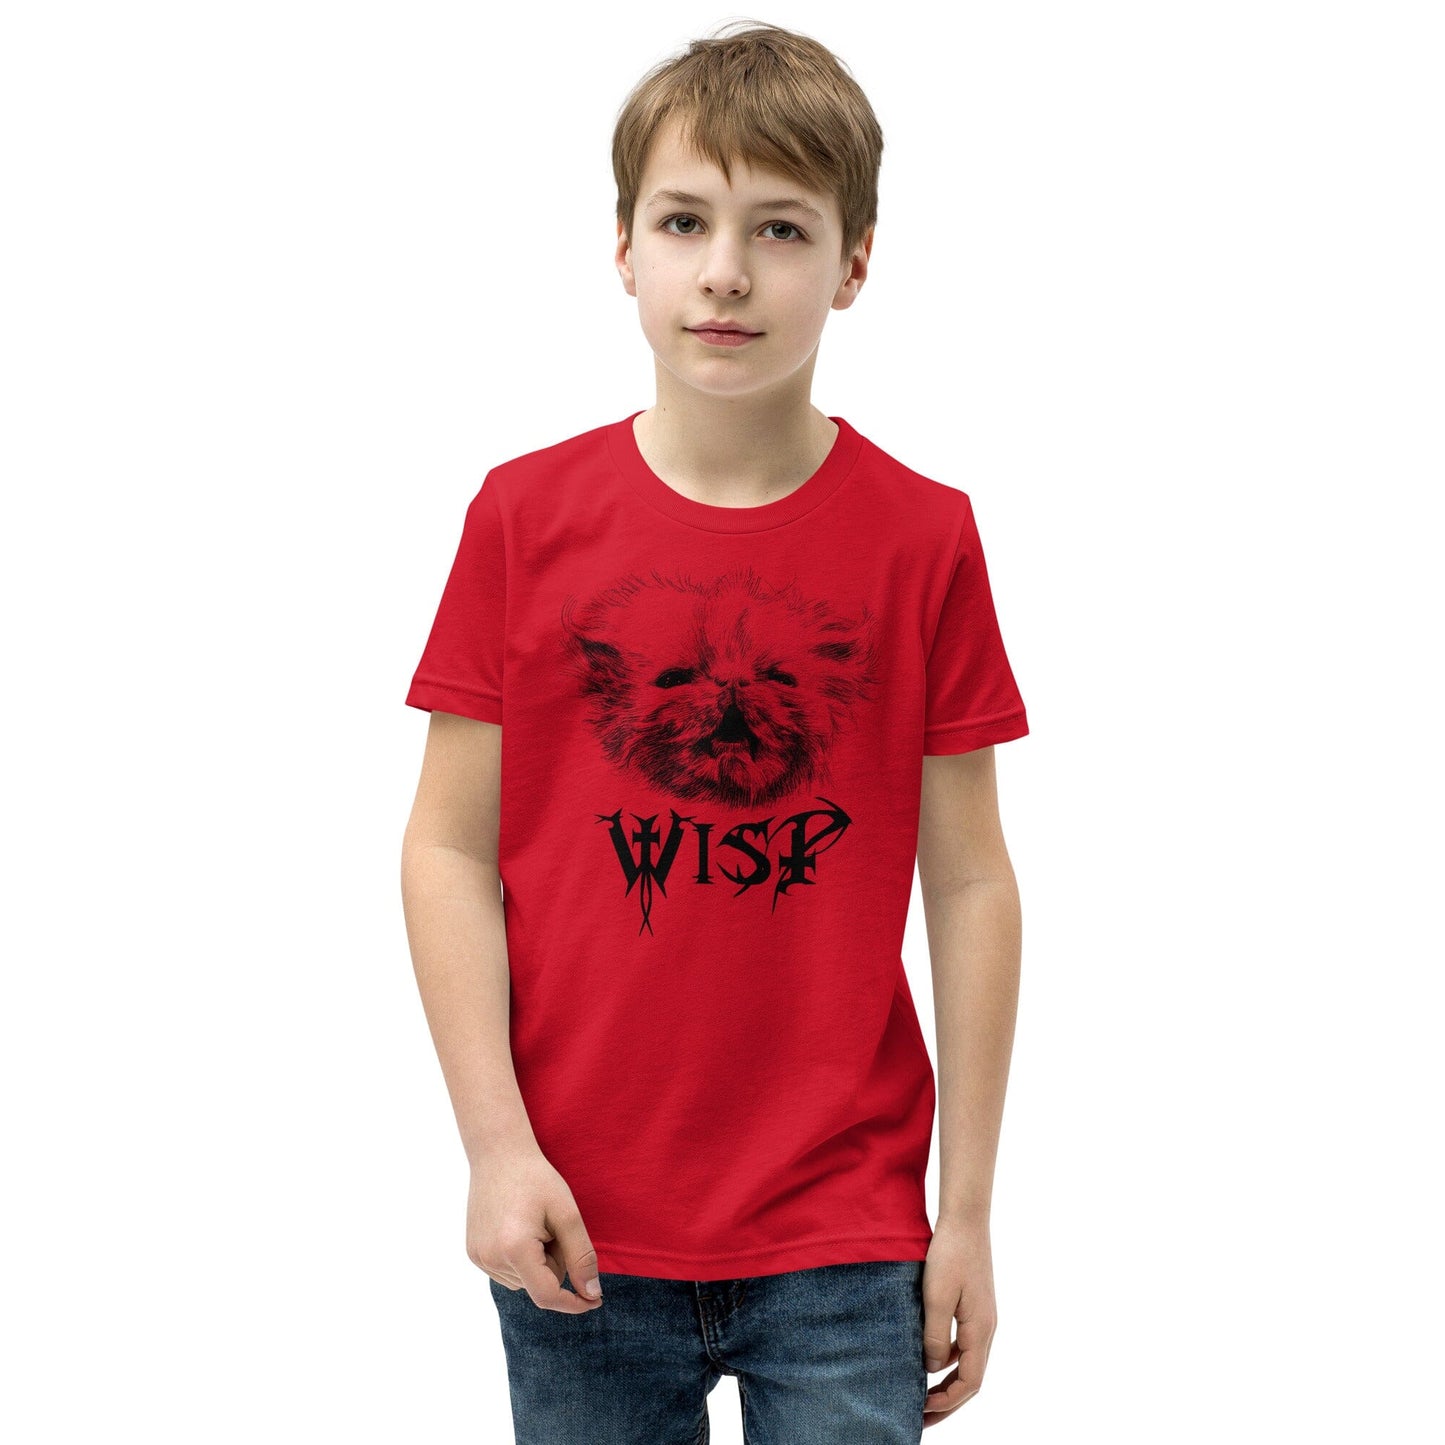 Metal Wisp YOUTH T-Shirt [Unfoiled] (All net proceeds go to Rags to Riches Animal Rescue) JoyousJoyfulJoyness Red S 